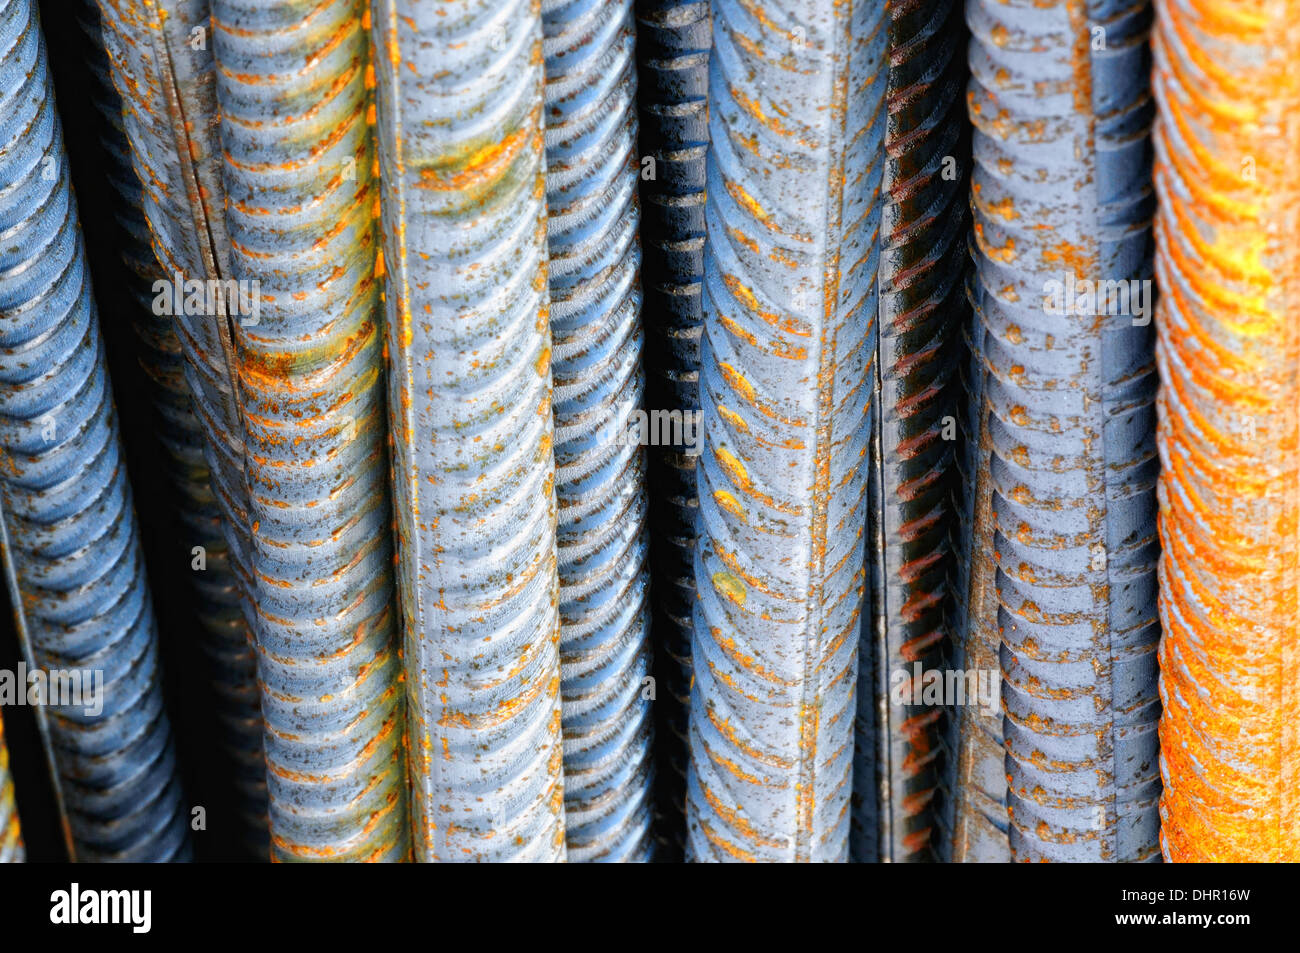 Structural steel rods Stock Photo